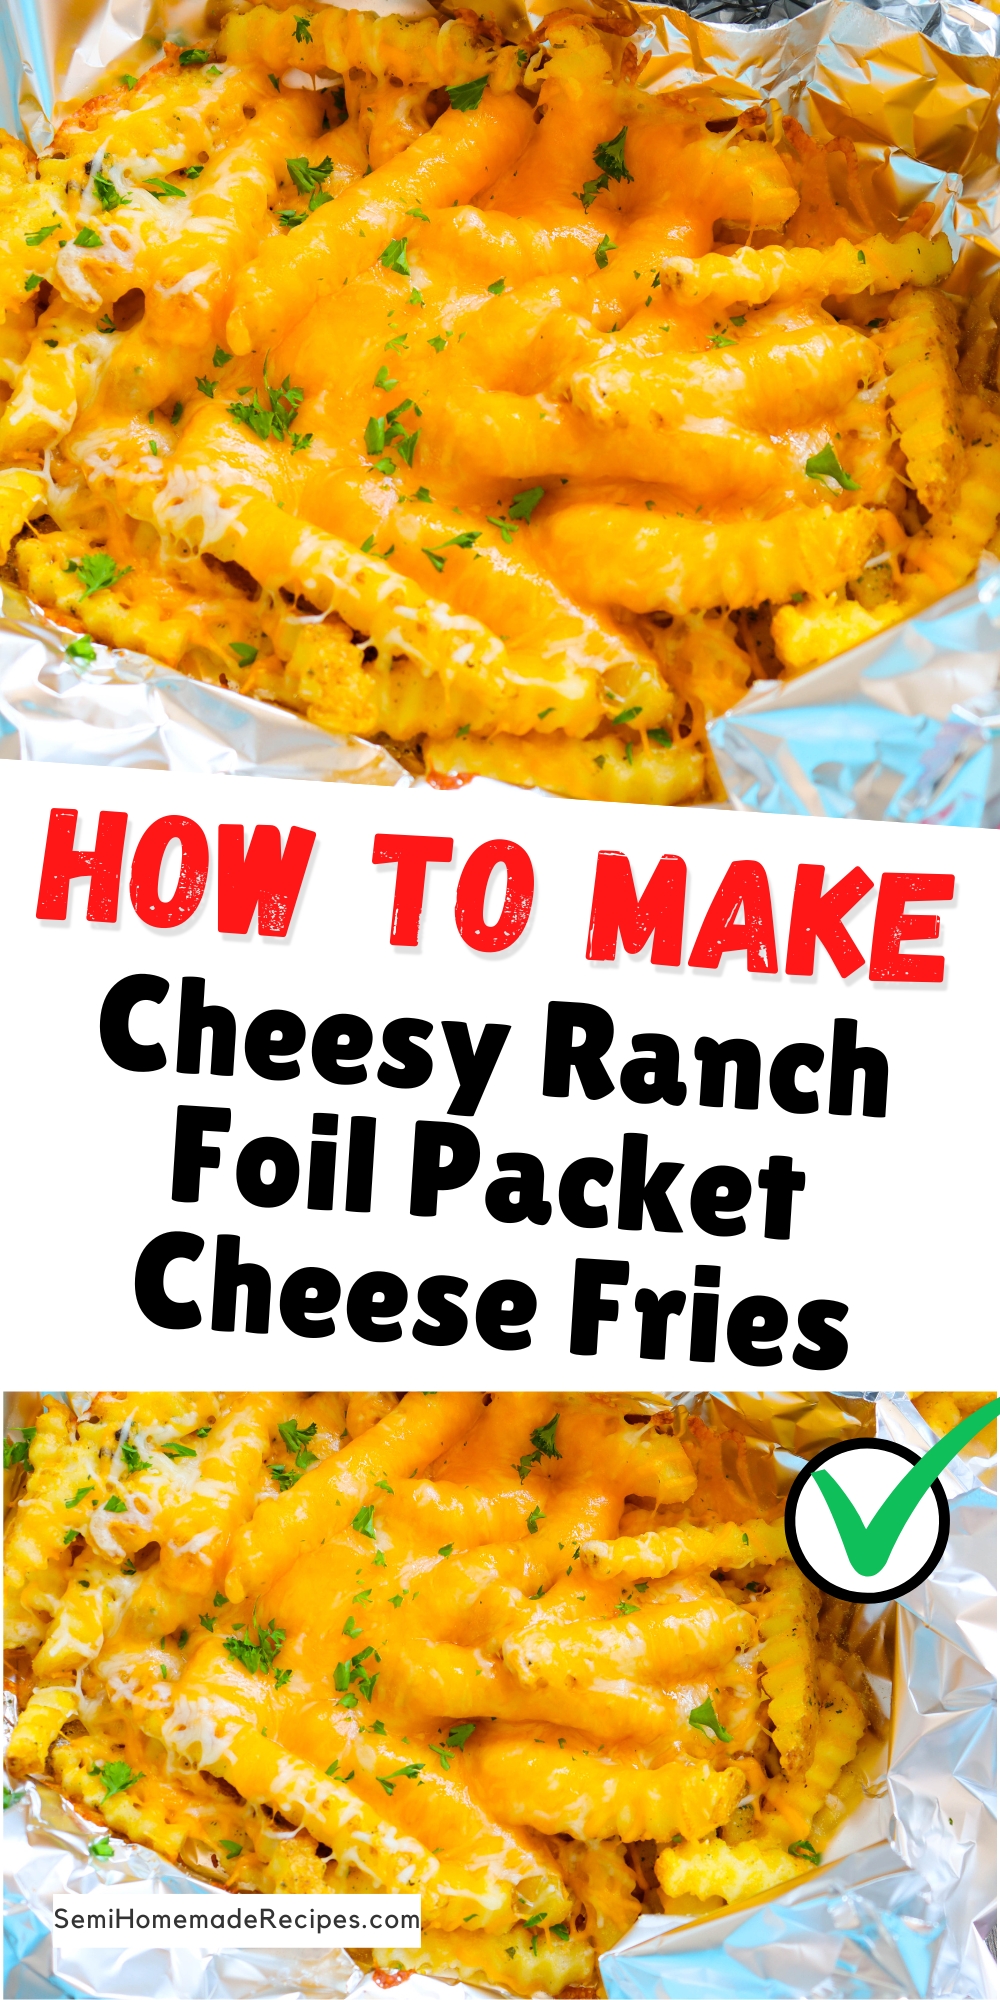 Going Camping or Staying at home? Either way, you'll love making these Cheesy Ranch Foil Packet Cheese Fries! You can make these over the campfire or at home in the oven! Don't like ranch? Leave off the ranch seasoning and add bacon bits!